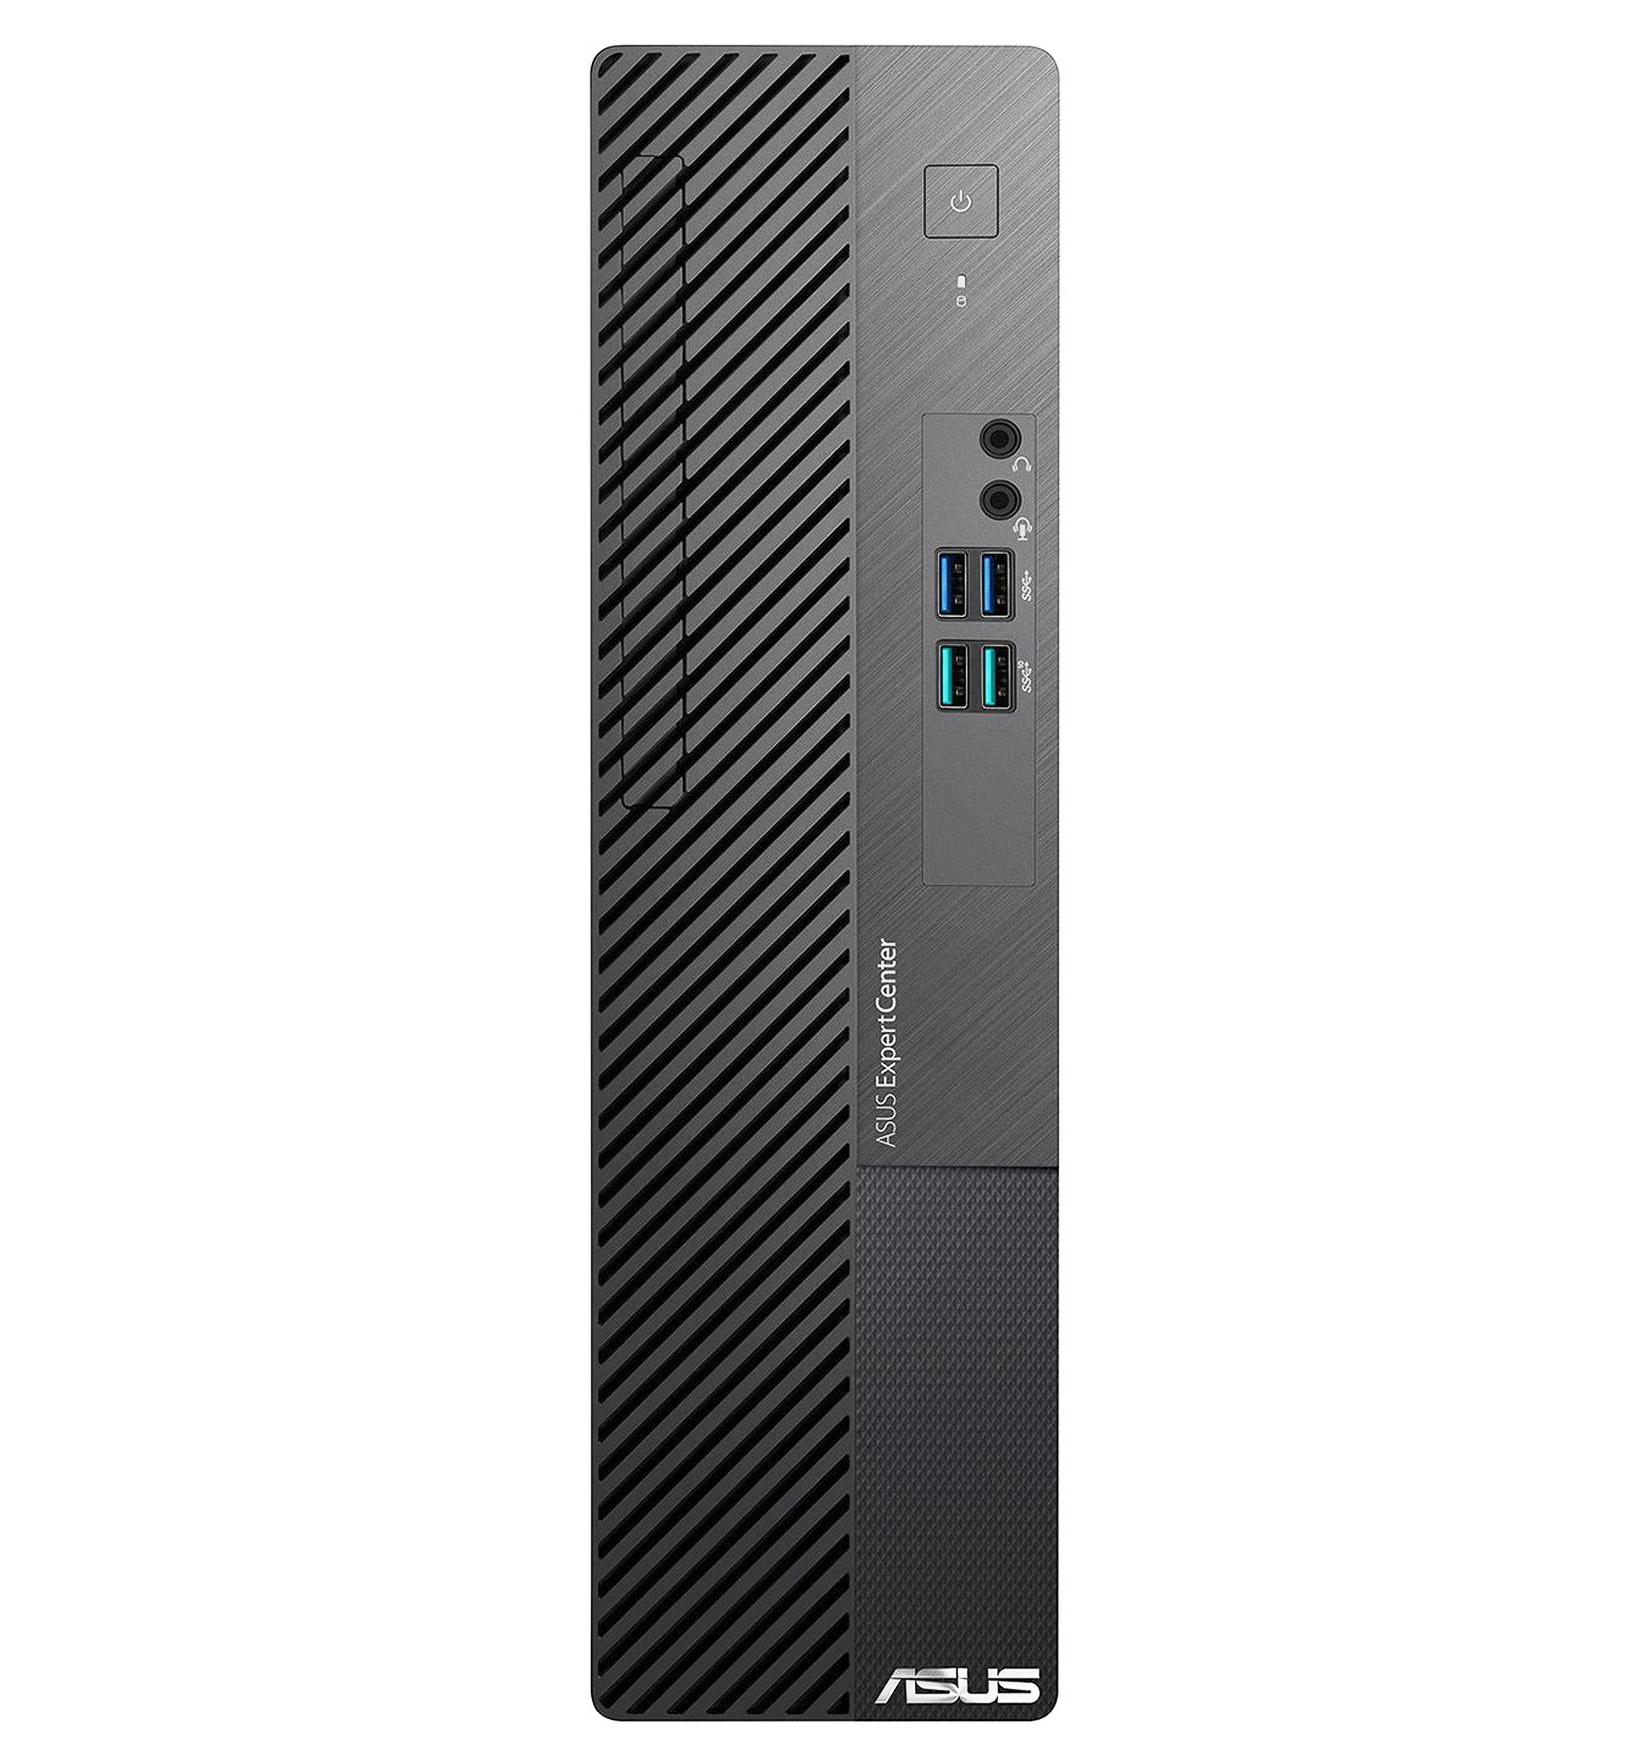 Asus Expert Center D5 SFF D500SCES-310105007W Desktop PC – Intel Core i3, 8GB RAM, 256GB SSD, with Optional Microsoft 365 Family (1 Year) – Black £449 post thumbnail image